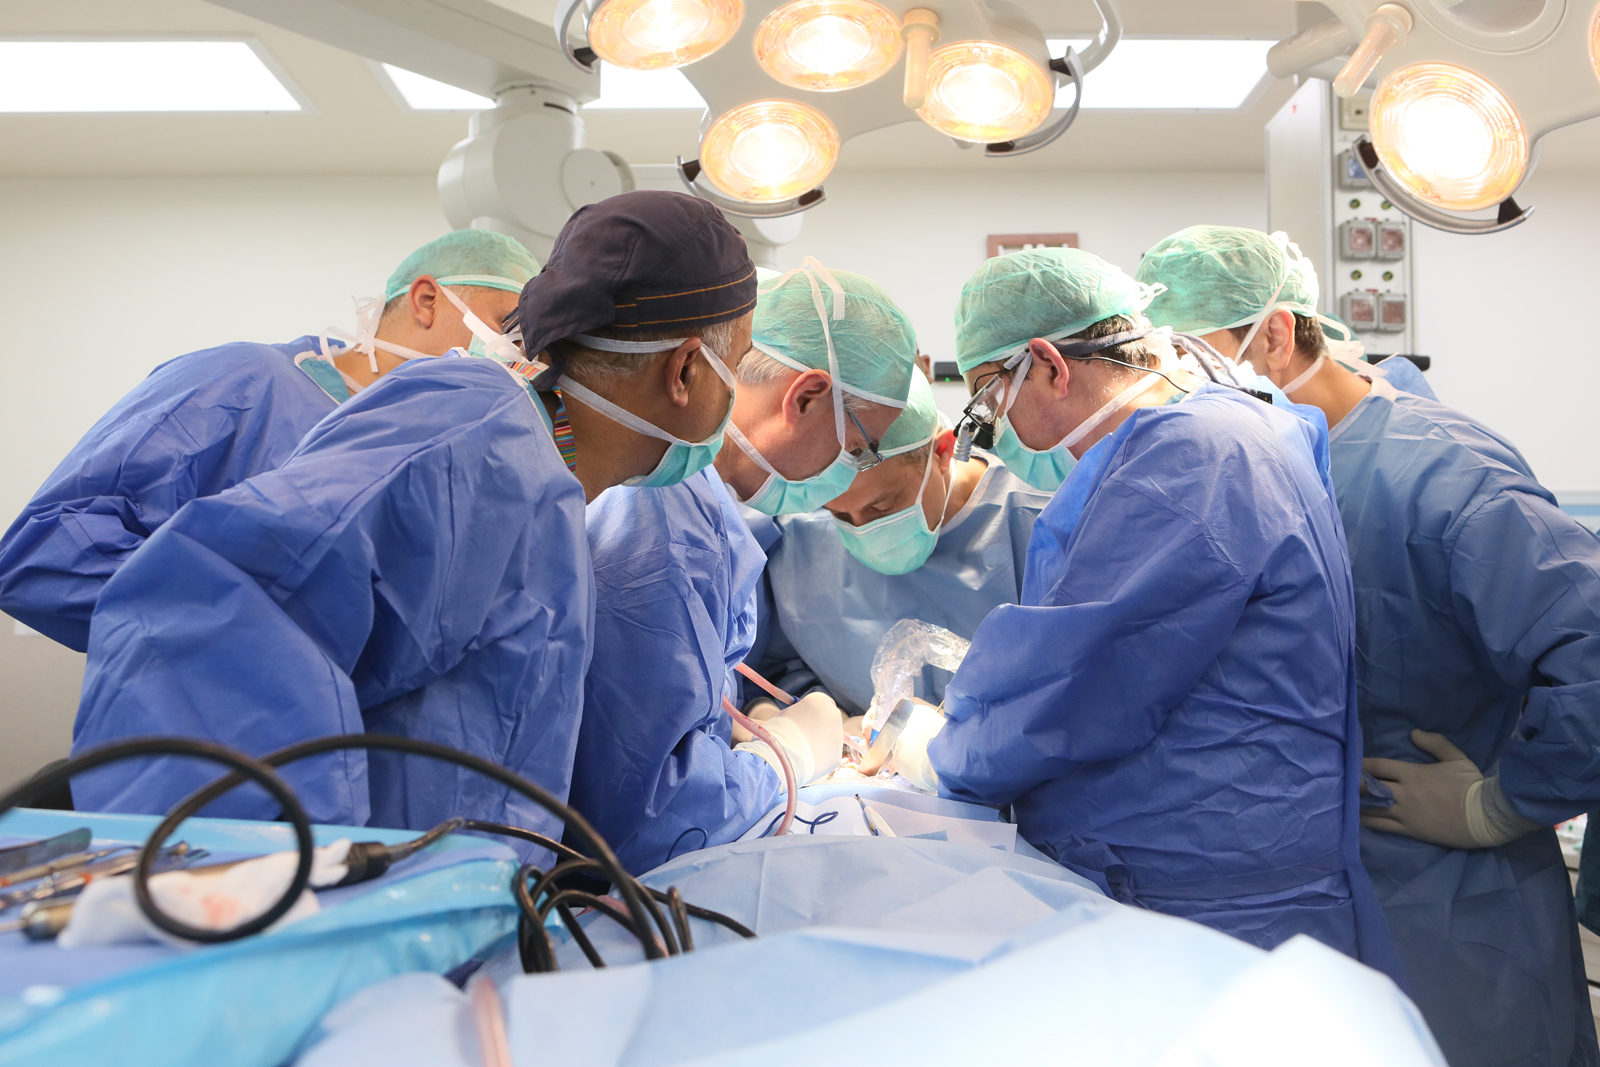 International group of doctors collaborate at the Rambam Health Care Campus in Haifa. Photo by Pioter Fliter